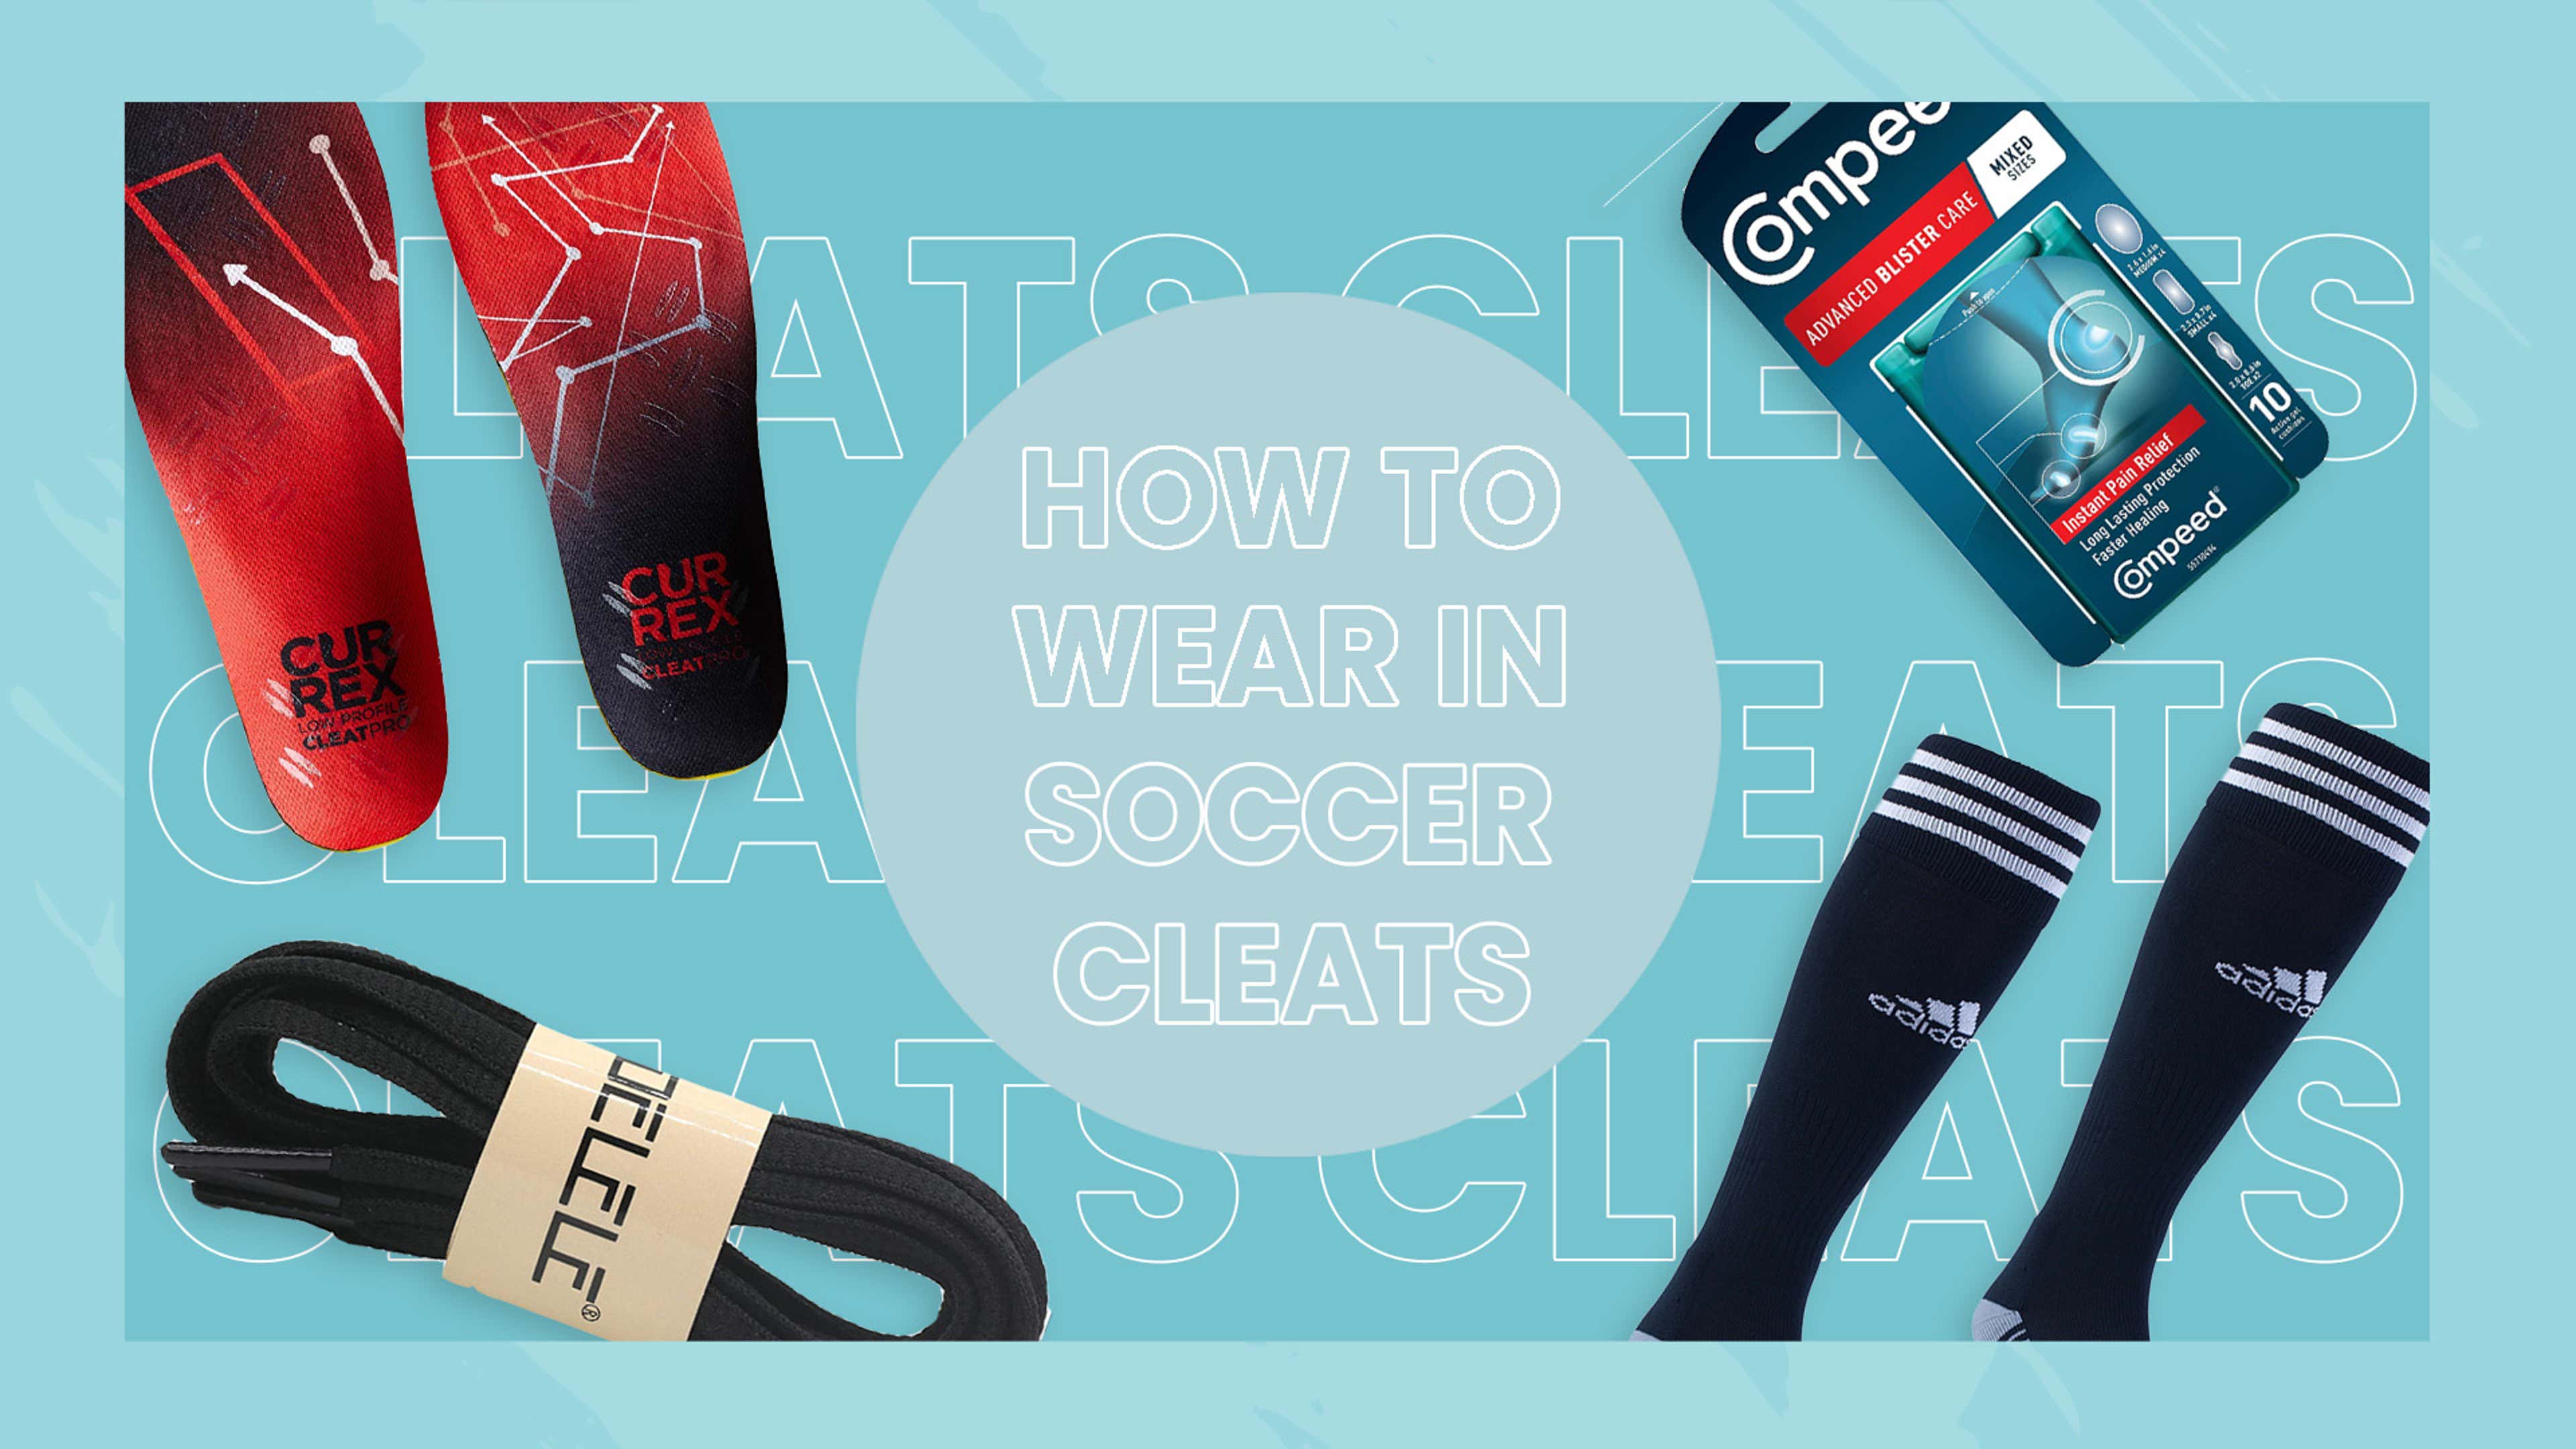 How to wear in soccer cleats